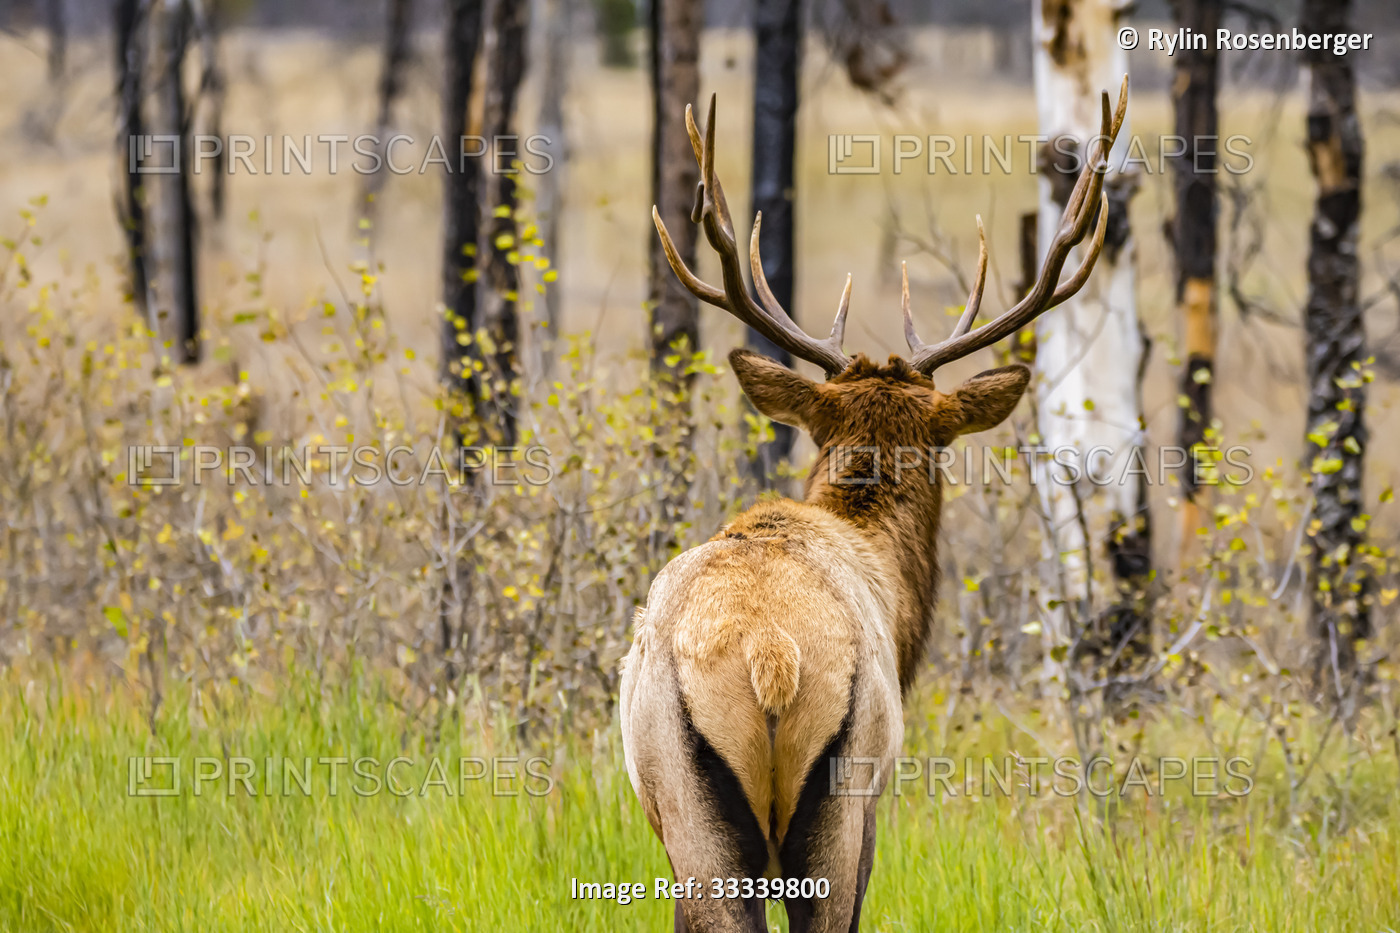 View taken from behind of an elk (Cervus canadensis) standing in a funny pose ...